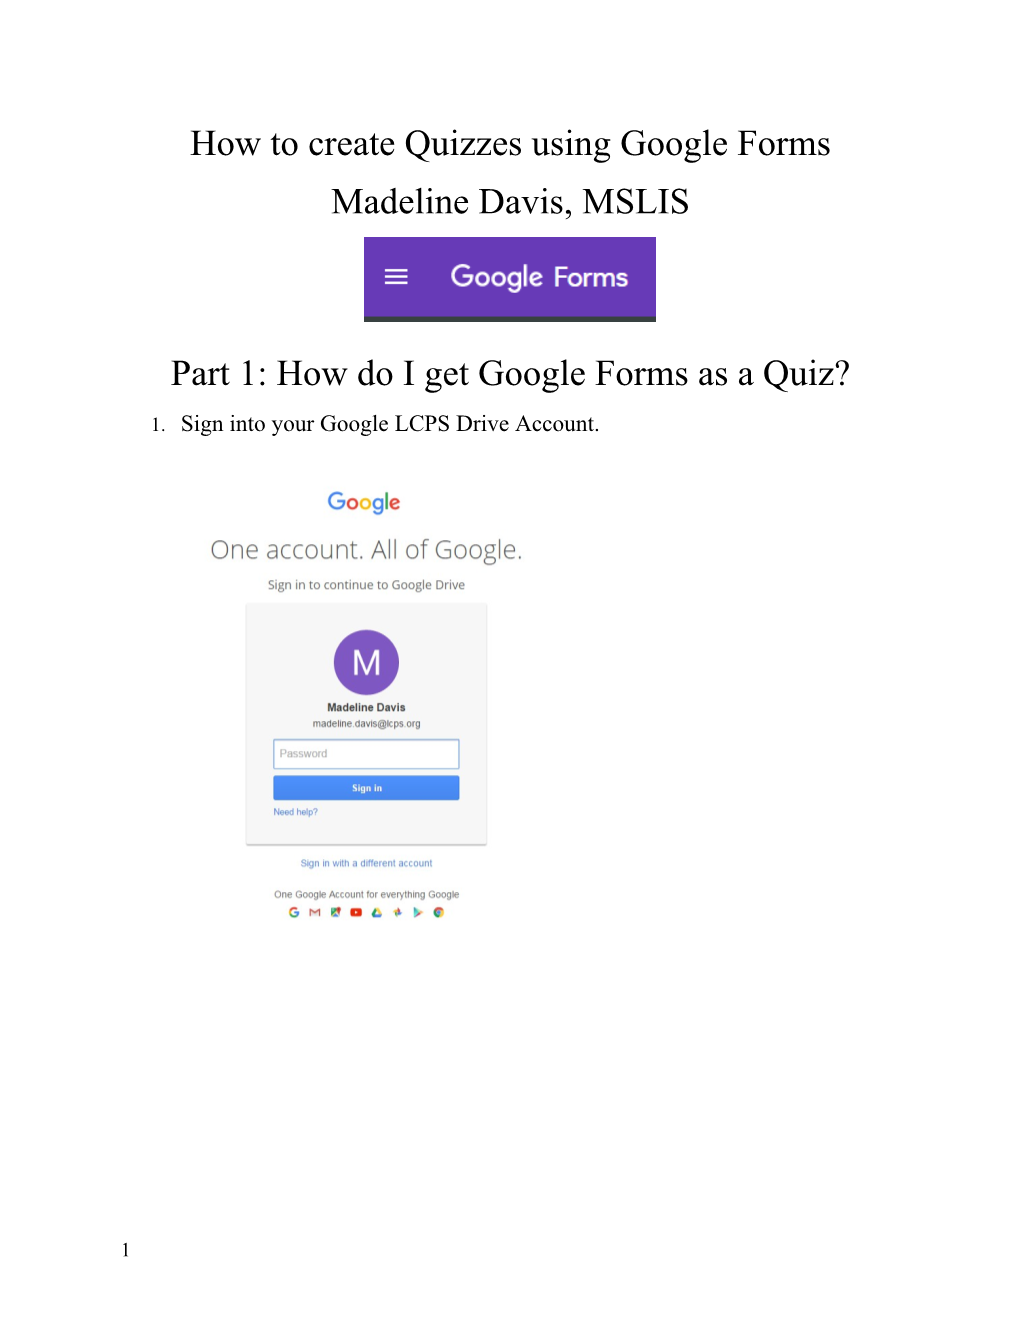 How to Create Quizzes Using Google Forms